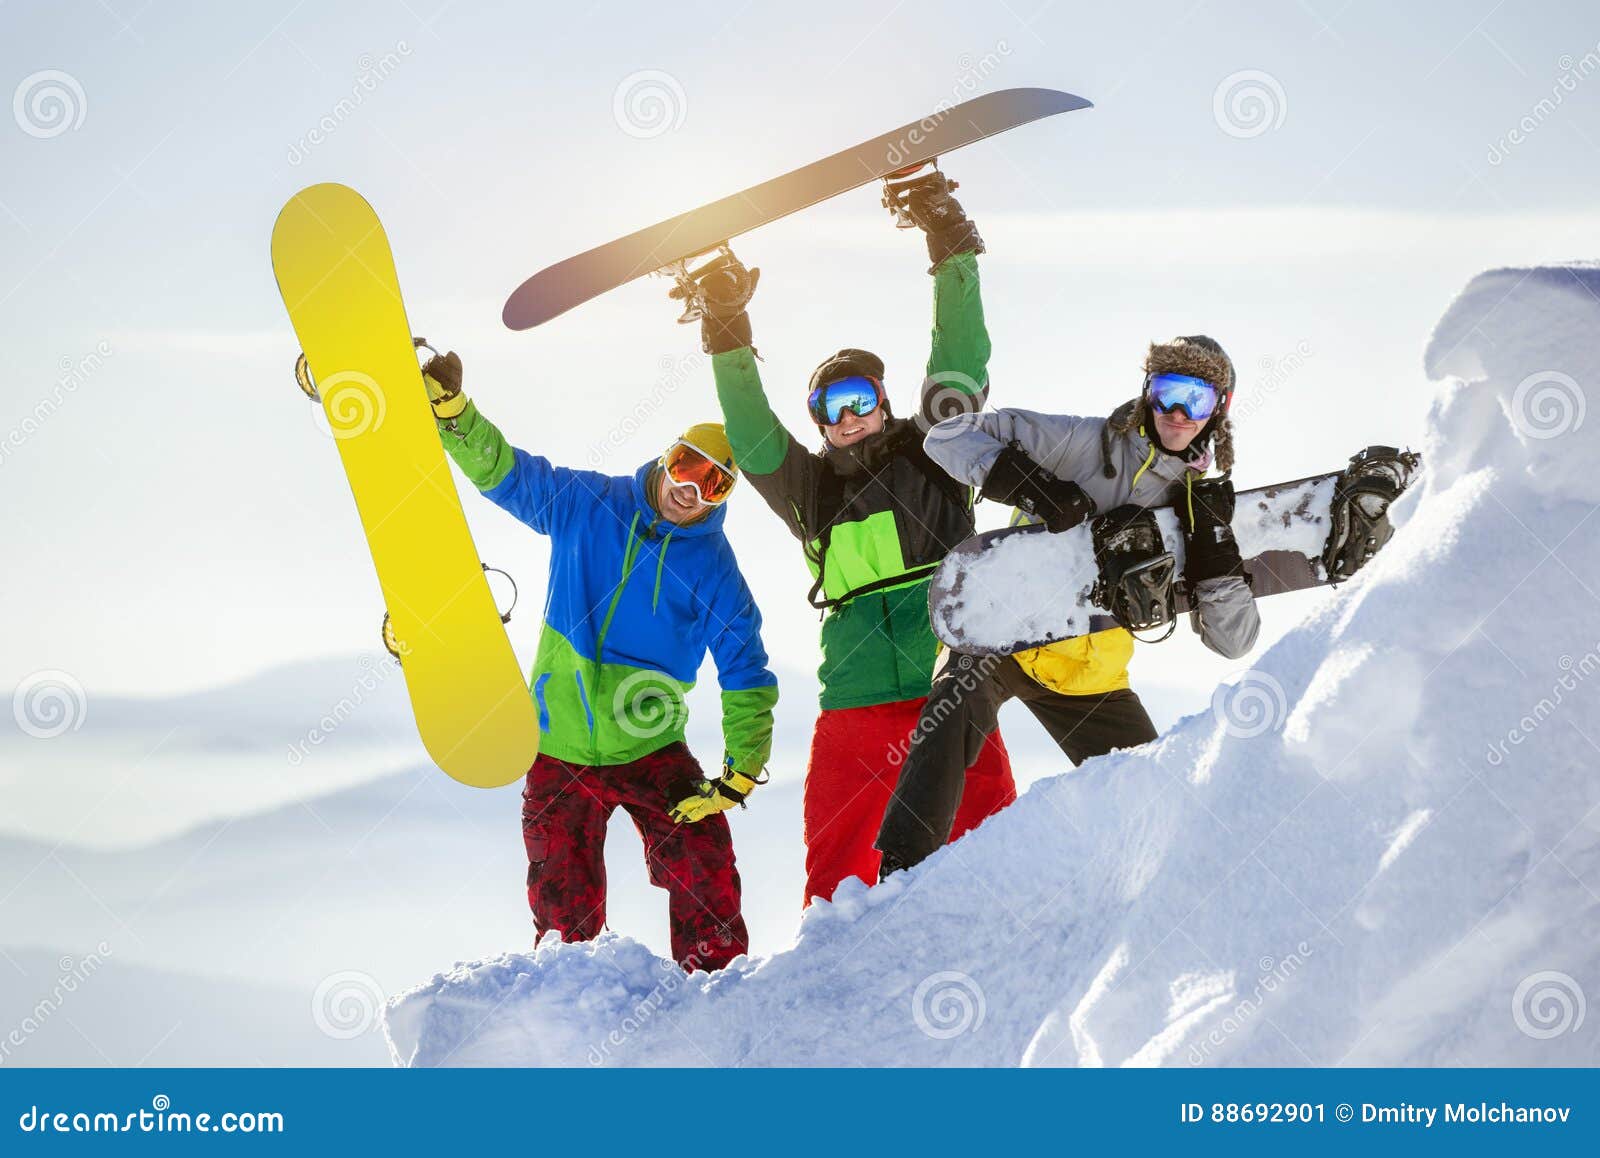 2,516 Snowboarders Fun Stock Photos - Royalty-Free Stock Photos from